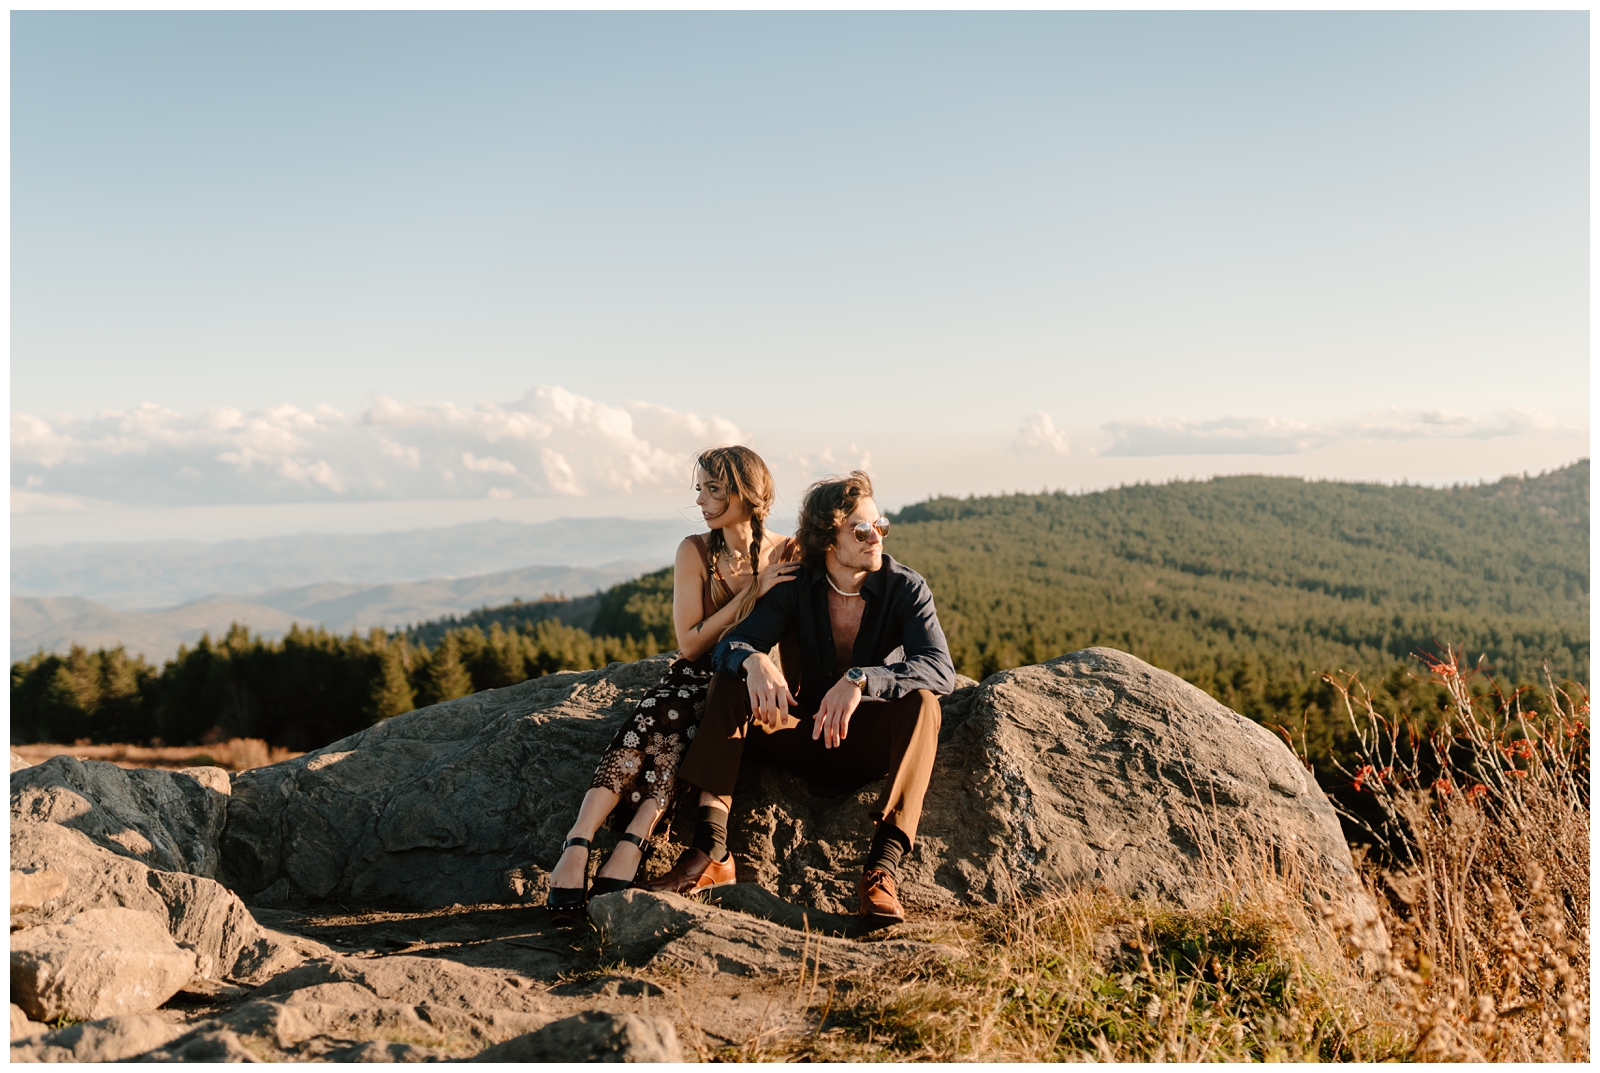 Retro Mountain Engagement Session in Asheville, NC by Destination wedding & elopement photographer